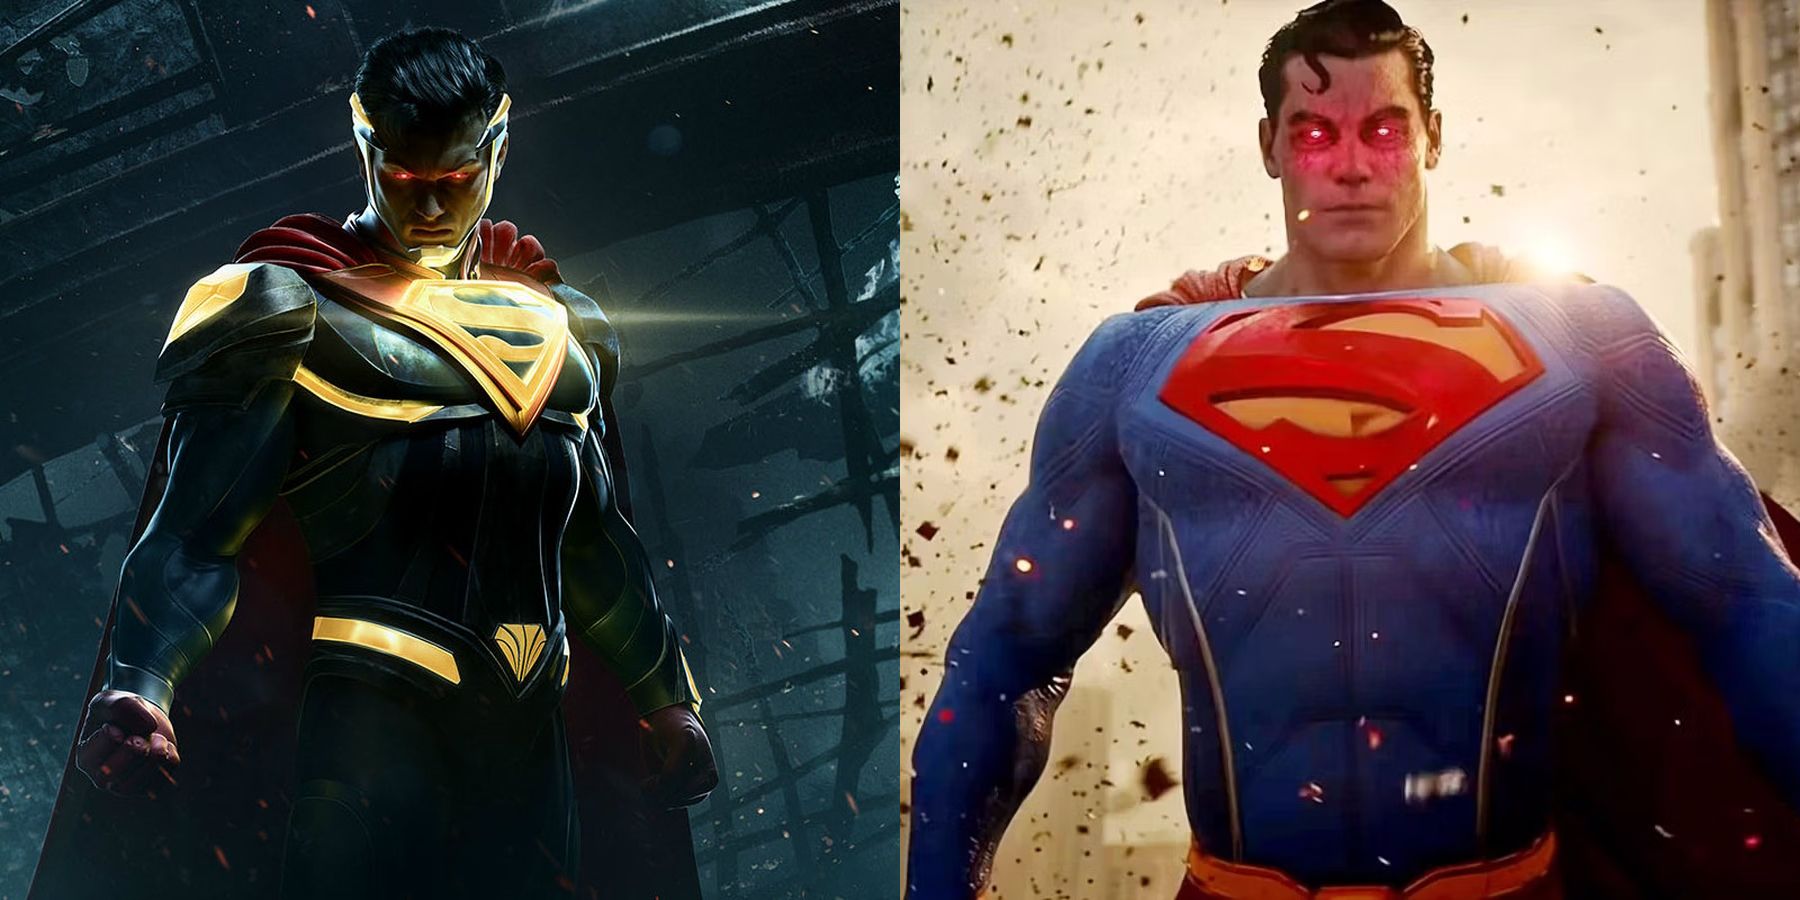 Evil versions of Superman from Injustice 2 and Suicide Squad: Kill the Justice League